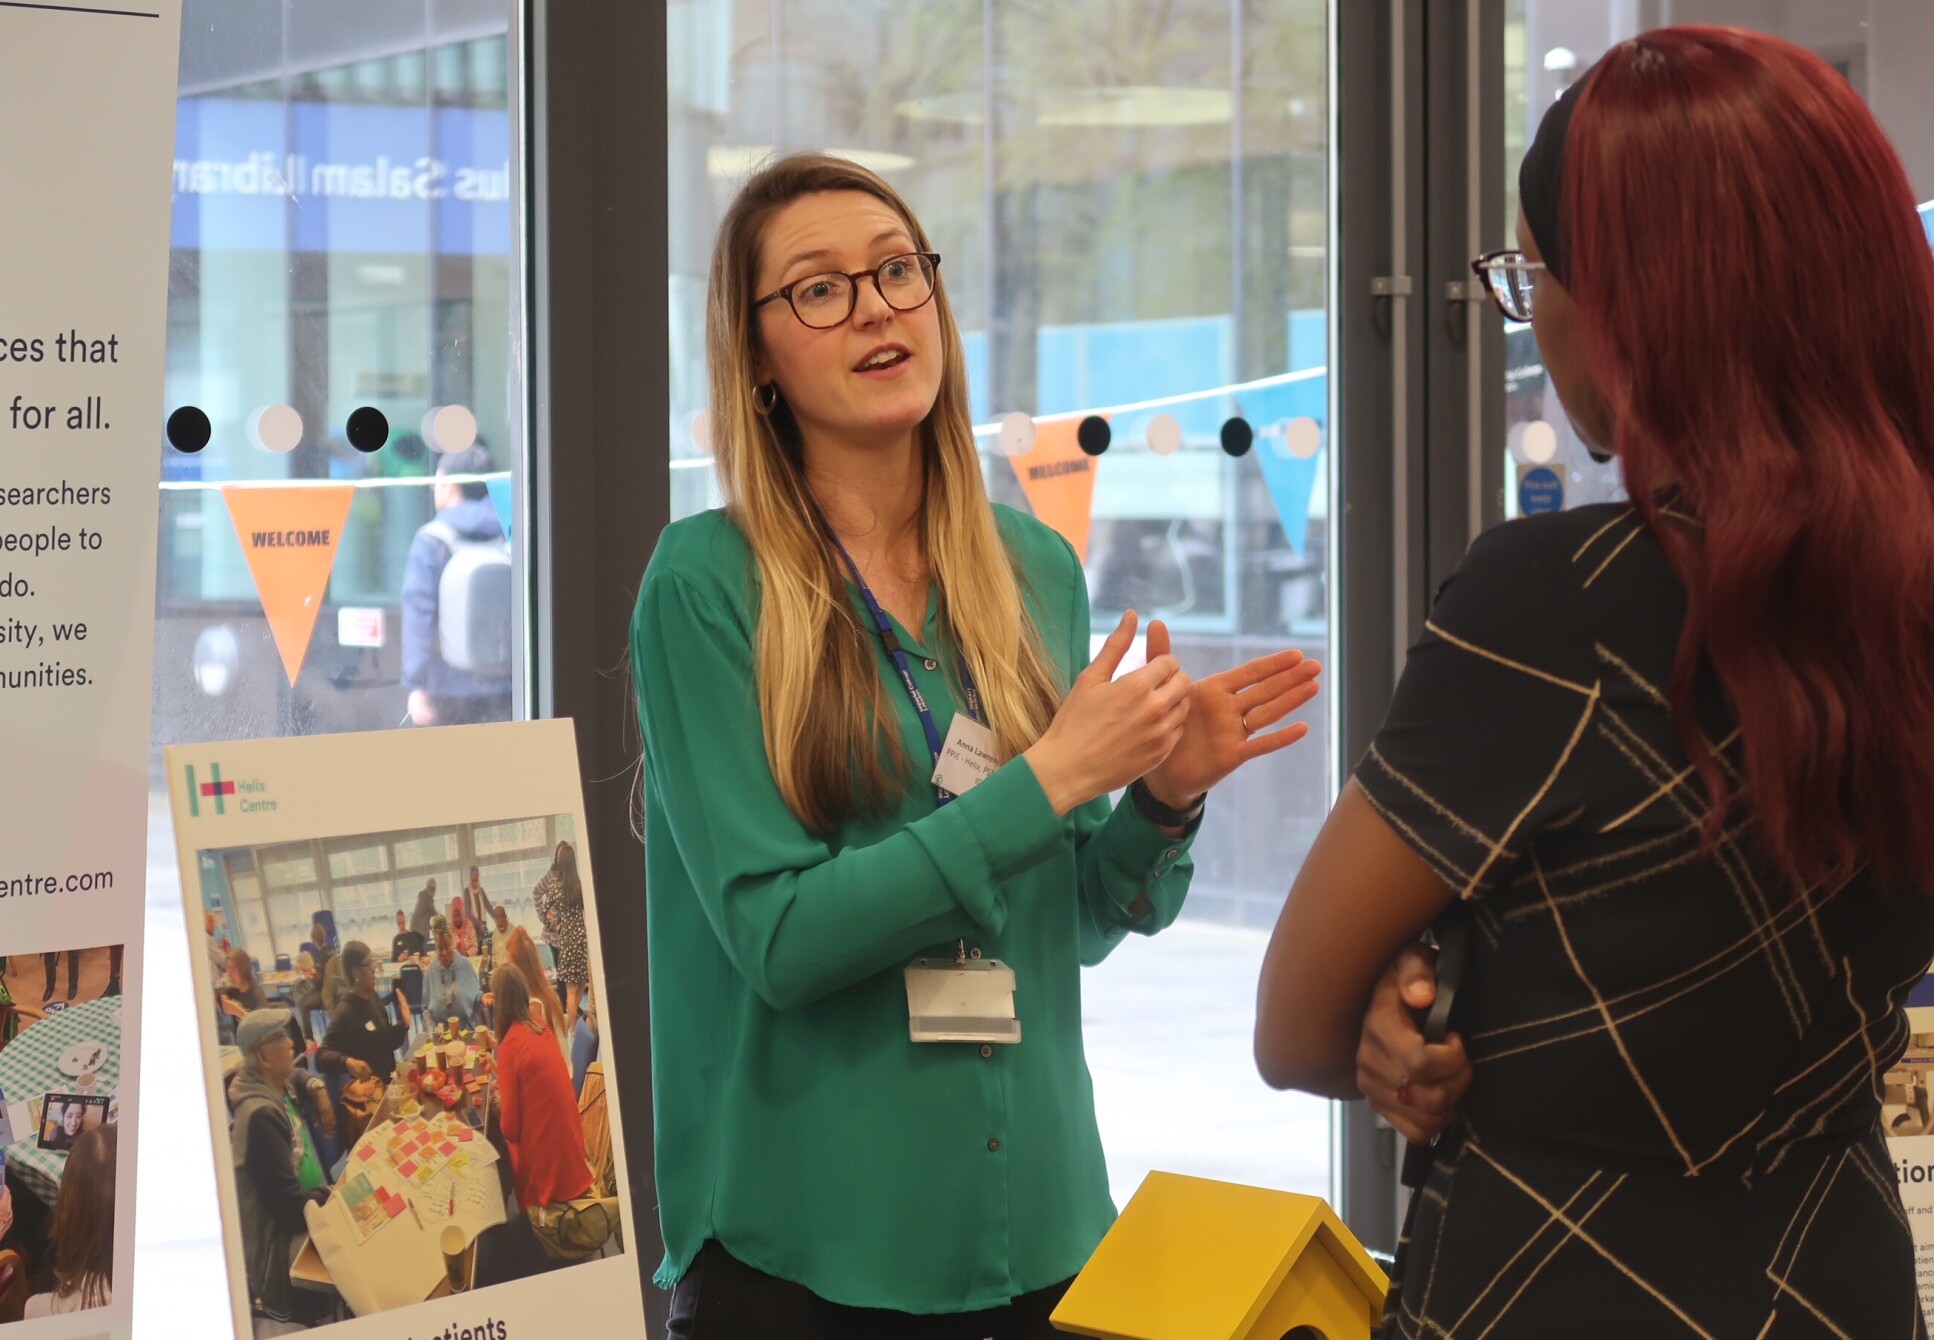 Anna Lawrence-Jones from the Helix Centre discussing her team’s work. Credits: Holly Merton/IGHI.